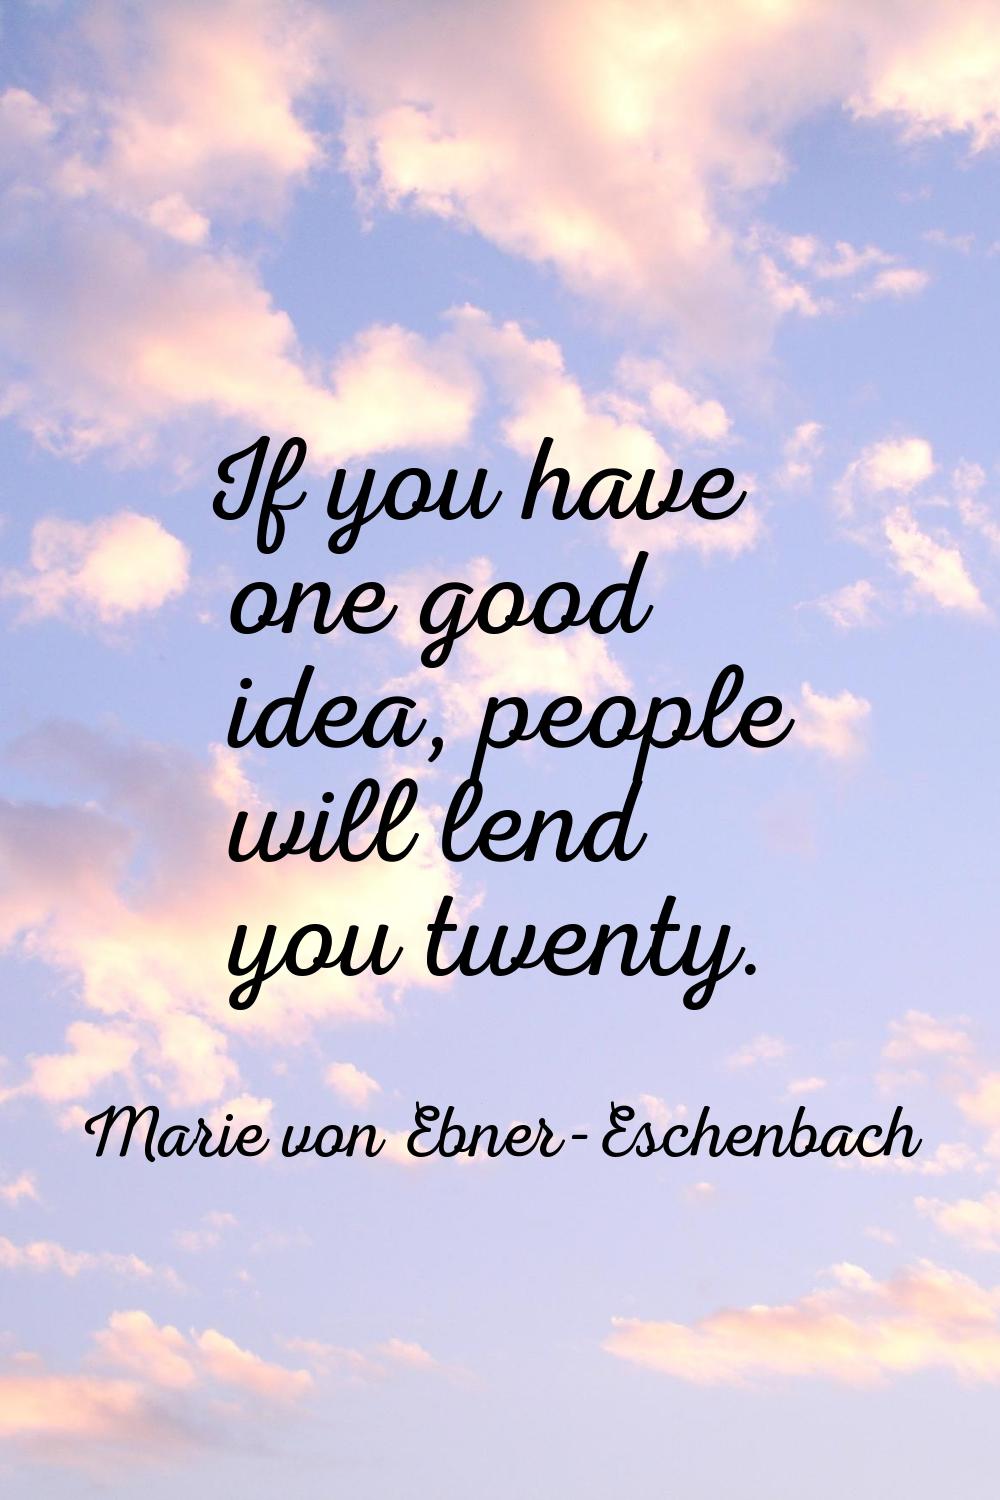 If you have one good idea, people will lend you twenty.